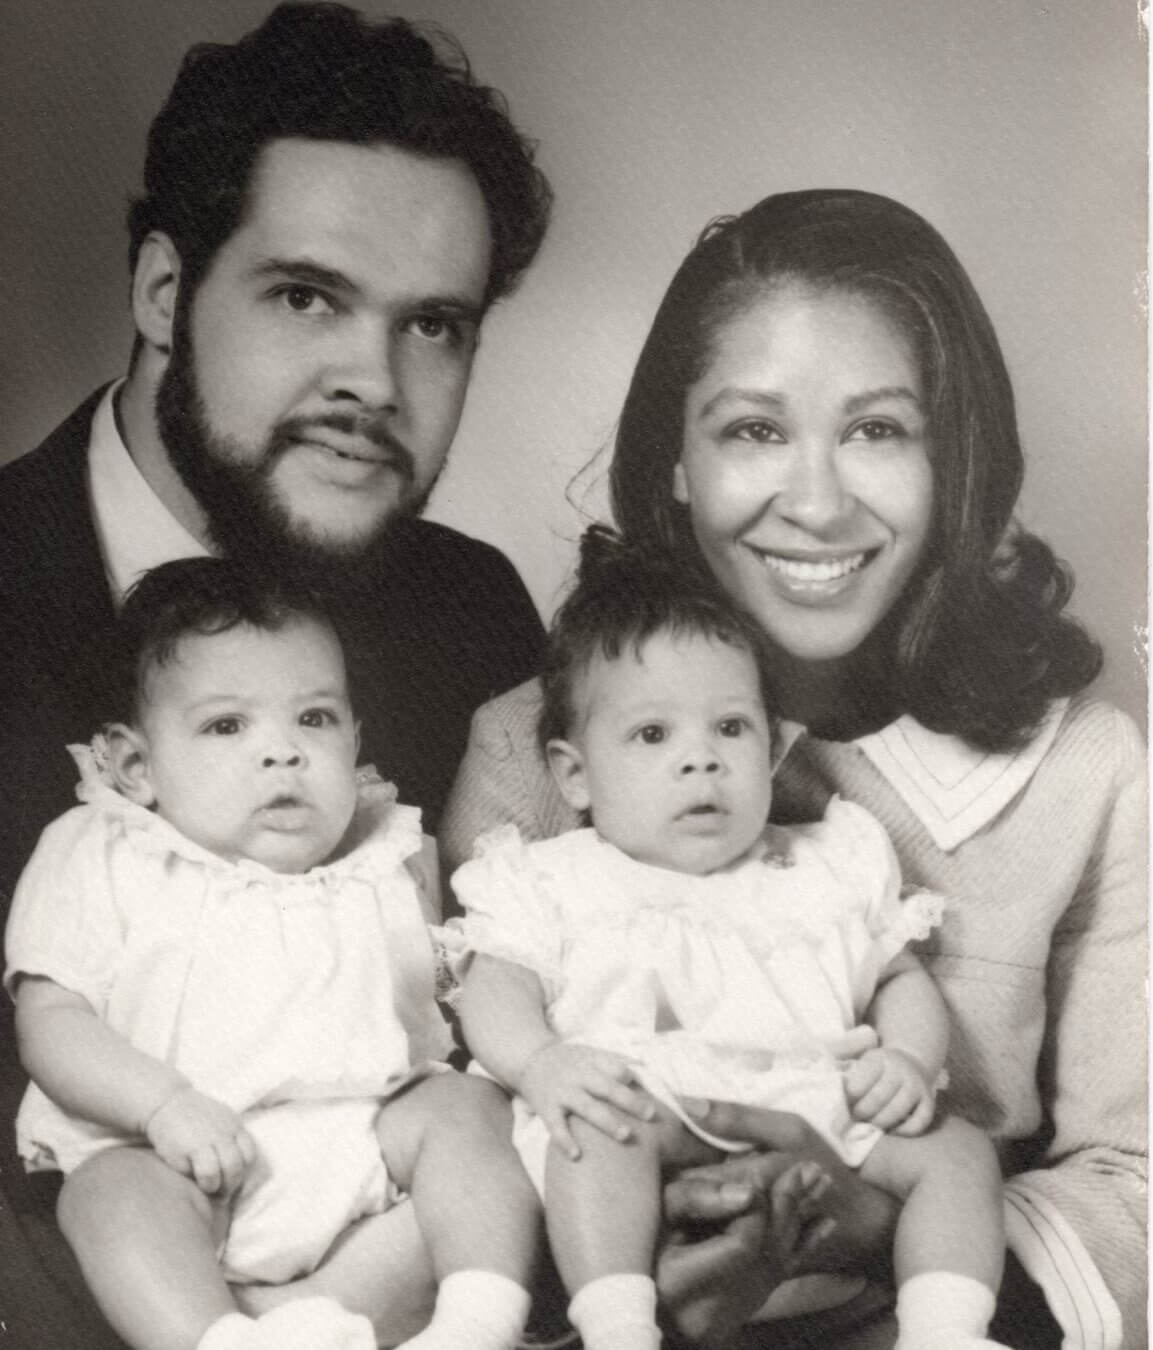 The Edelhart family in 1967: Arthur and Harriett, with twins Courtenay, left, and Ashley.